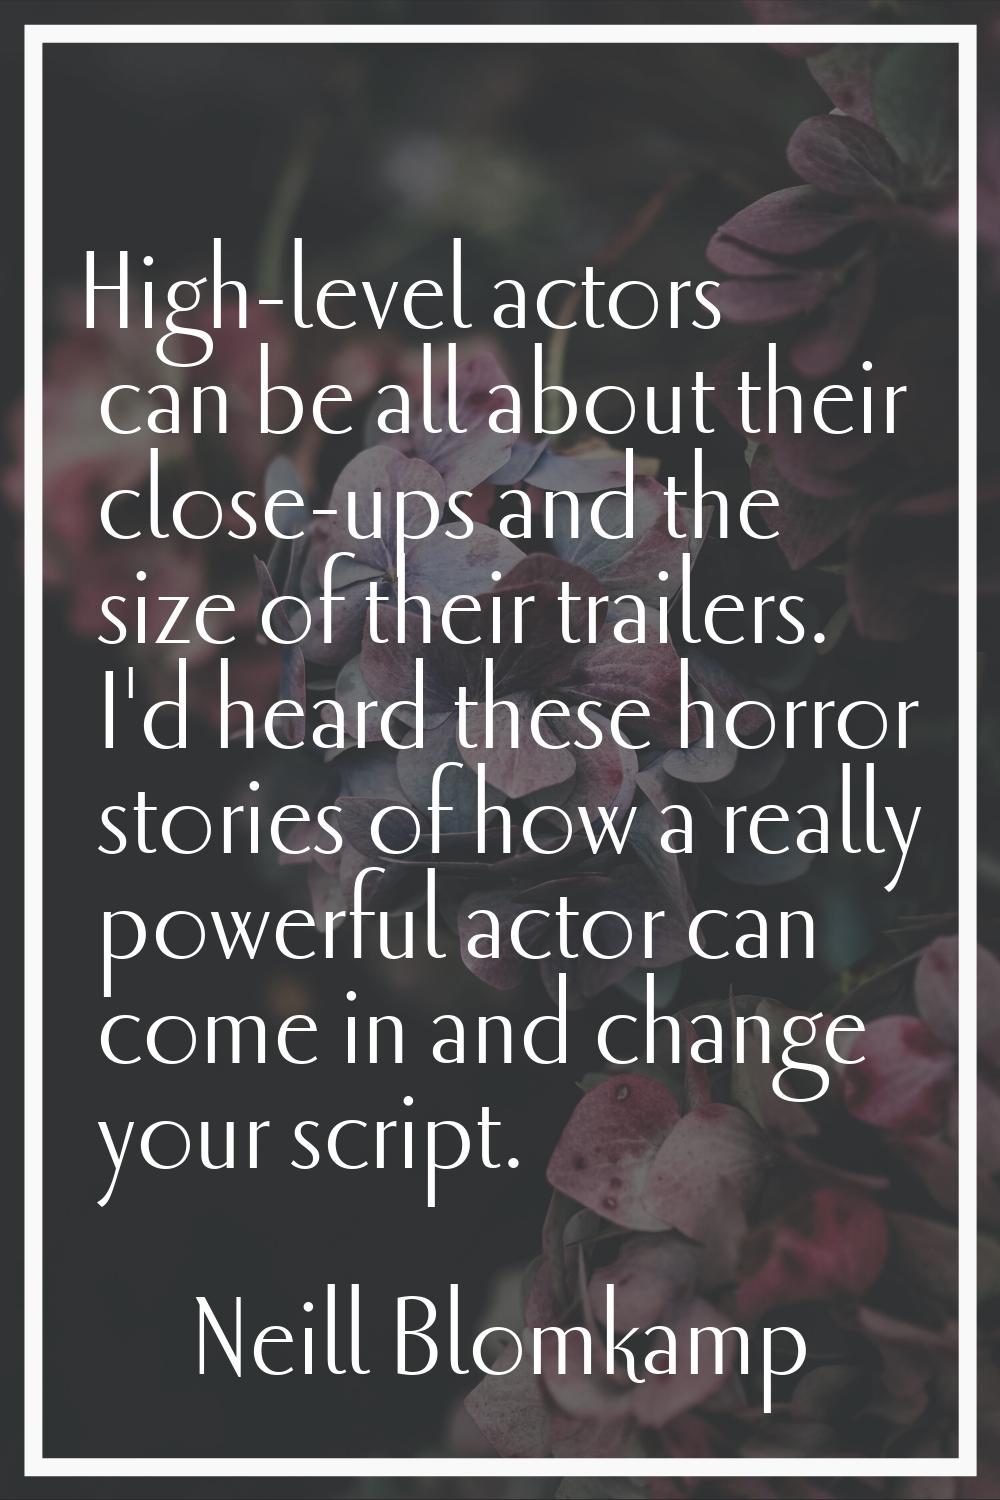 High-level actors can be all about their close-ups and the size of their trailers. I'd heard these 